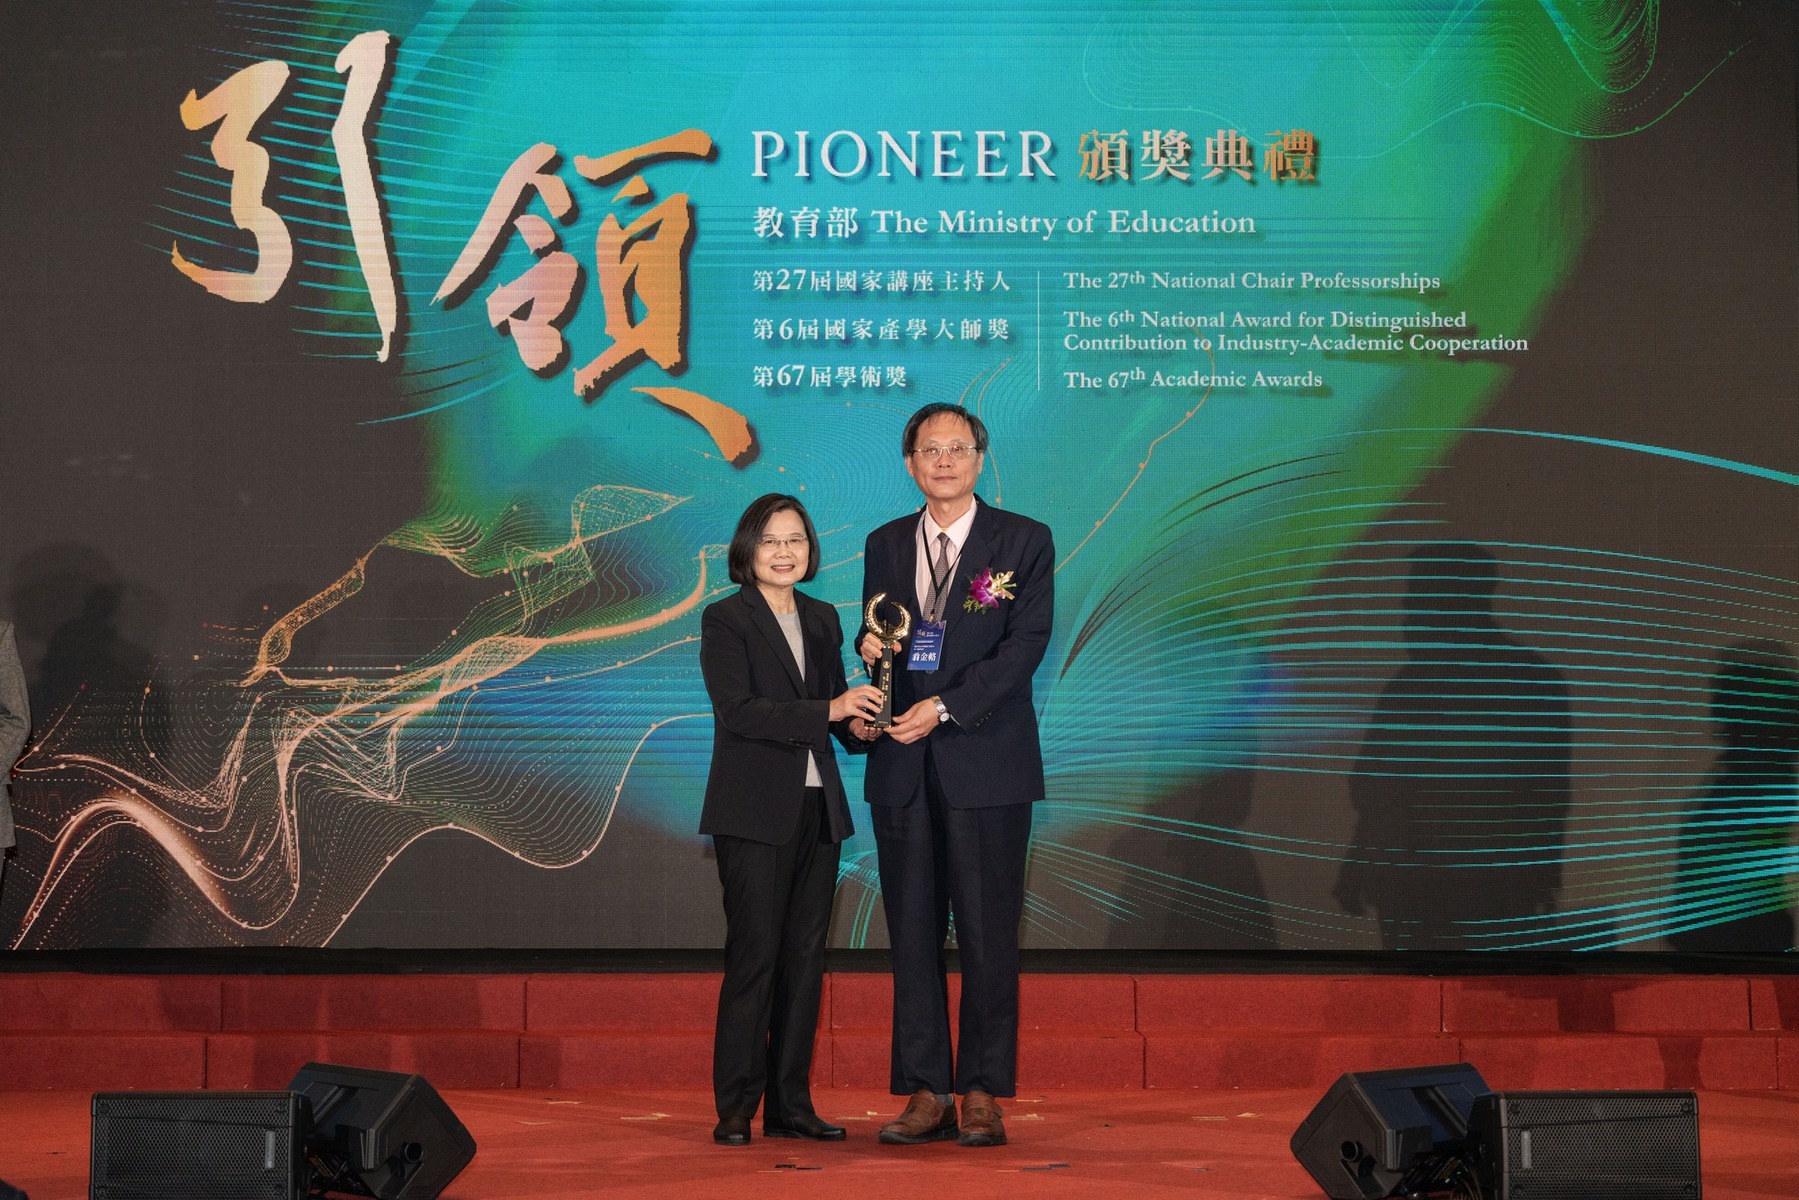 Kin-Lu Wong, an Outstanding Chair Professor of the Department of Electrical Engineering at NSYSU, was awarded the honorary life-time National Chair Professor of the MOE.